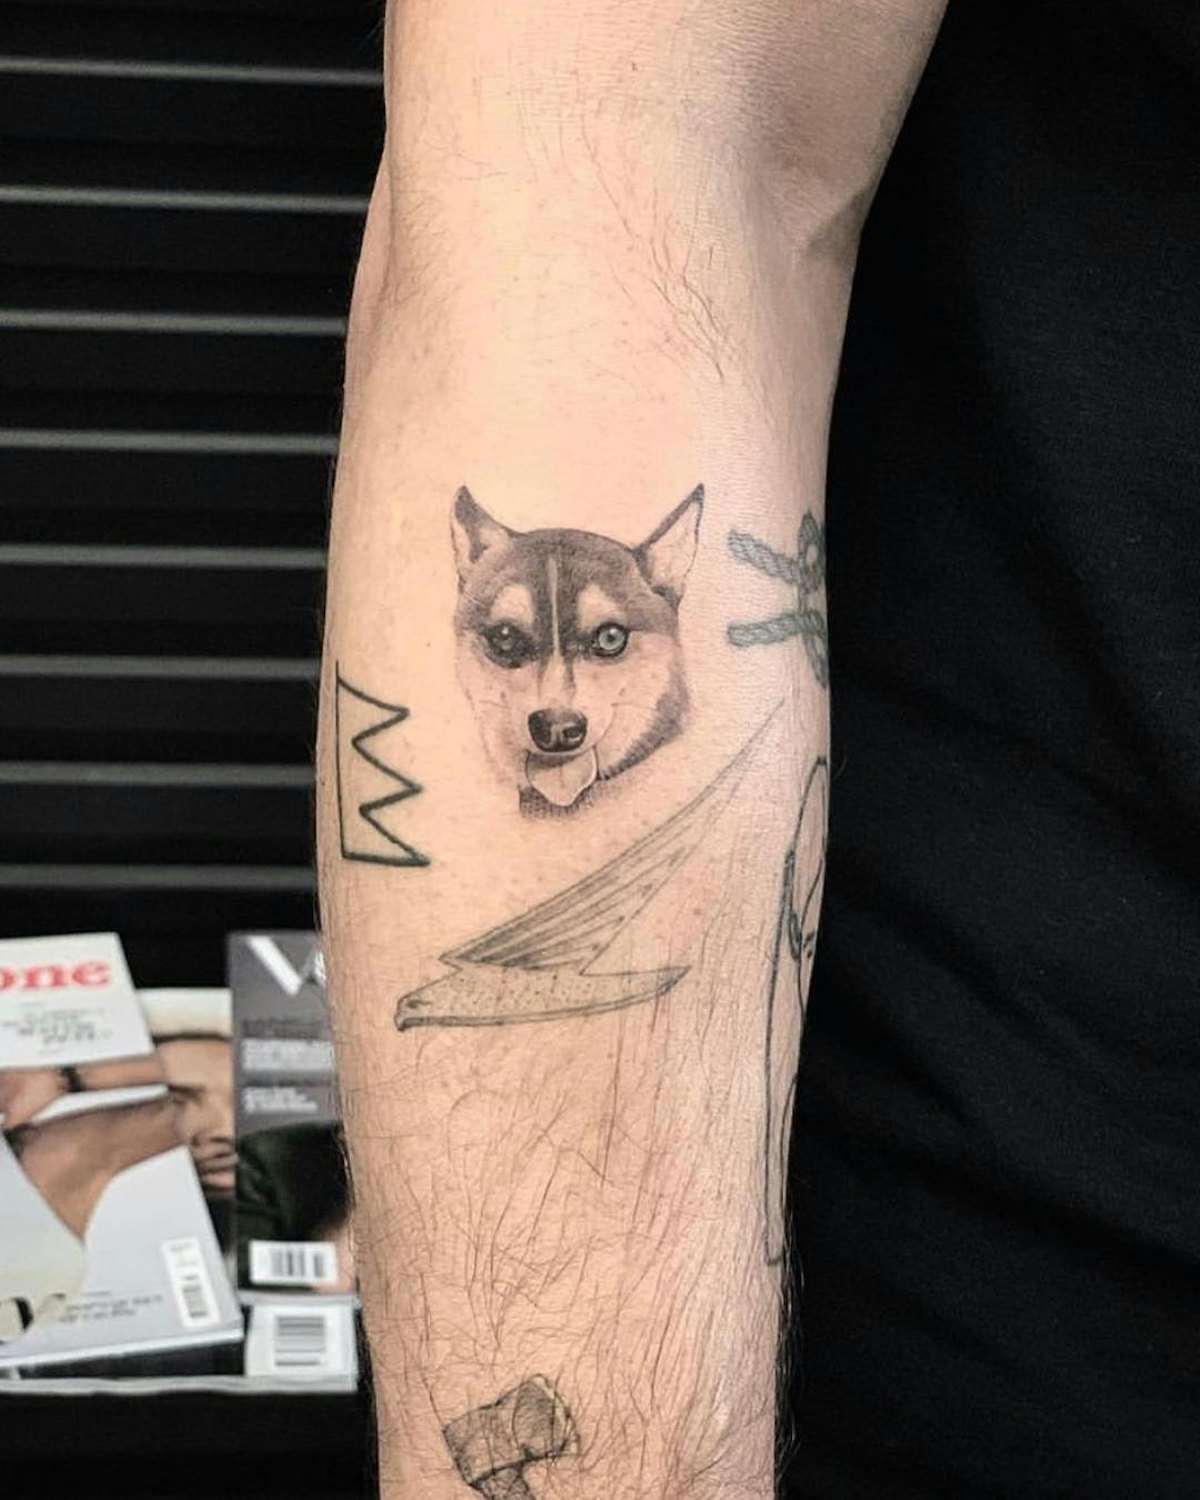 Joe Jonas and Sophie Turner have a matching tattoo of their late dog. 